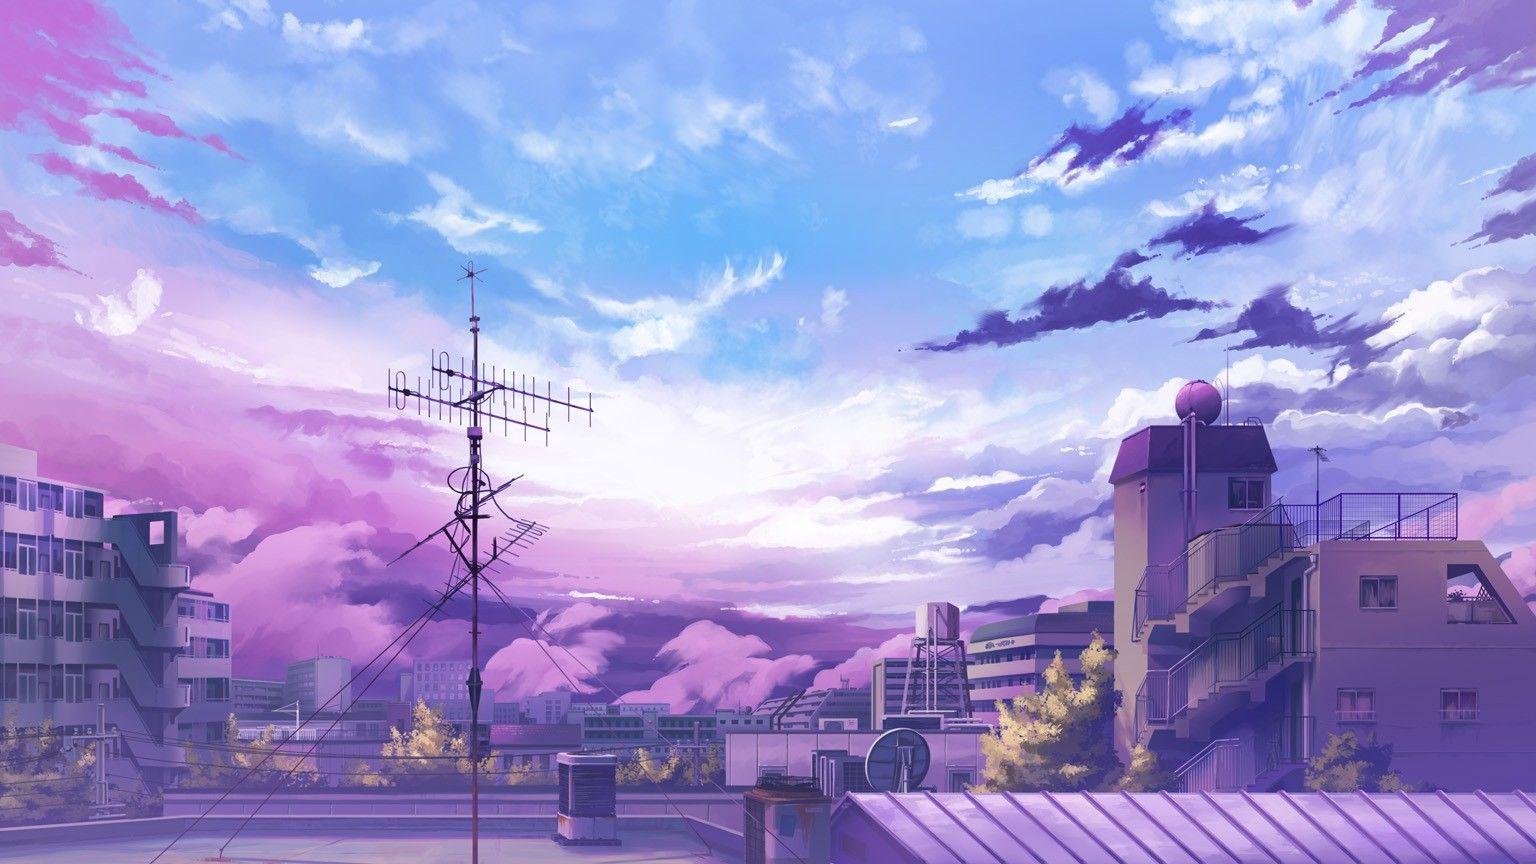 Anime Film Yourname Sky Illustration Art iPhone 8 Wallpapers Free Download